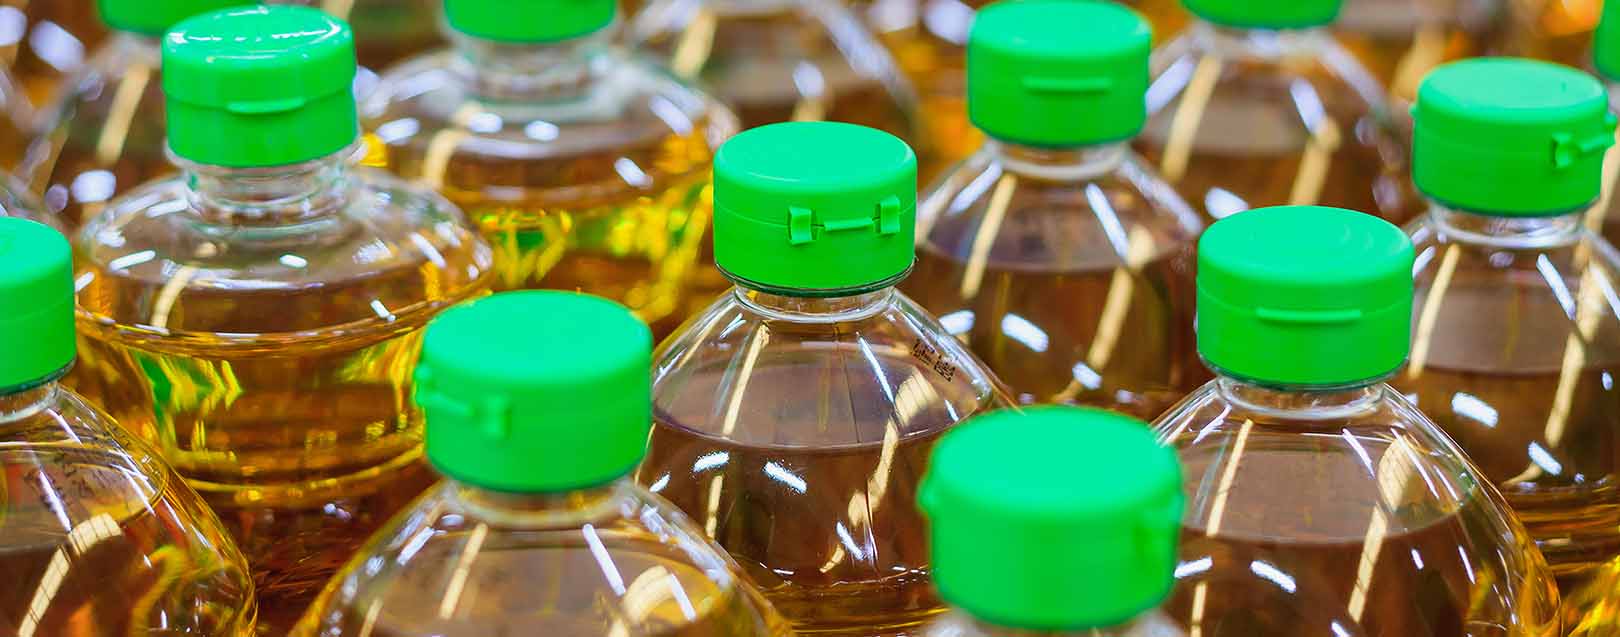 Vegetable oil imports up 28% in February